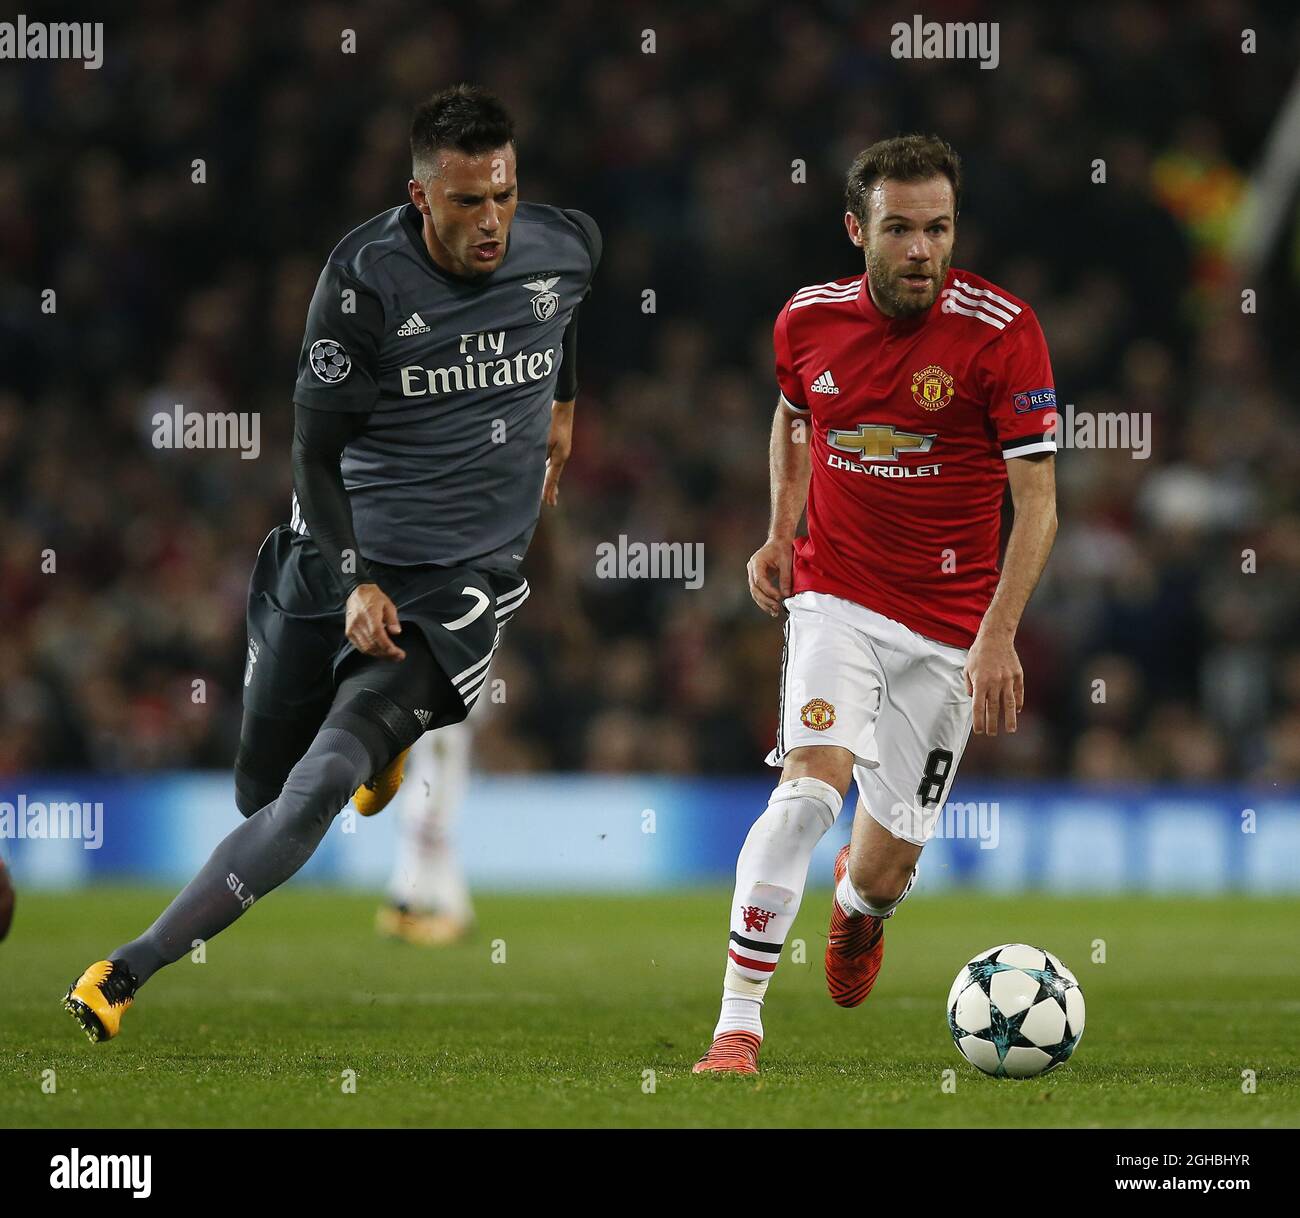 Andreas Samaris of SL Benfica shadows Juan Mata of Manchester United during the Champions League Group A match at the Old Trafford Stadium, Manchester. Picture date: October 31st 2017. Picture credit should read: Andrew Yates/Sportimage via PA Images Stock Photo